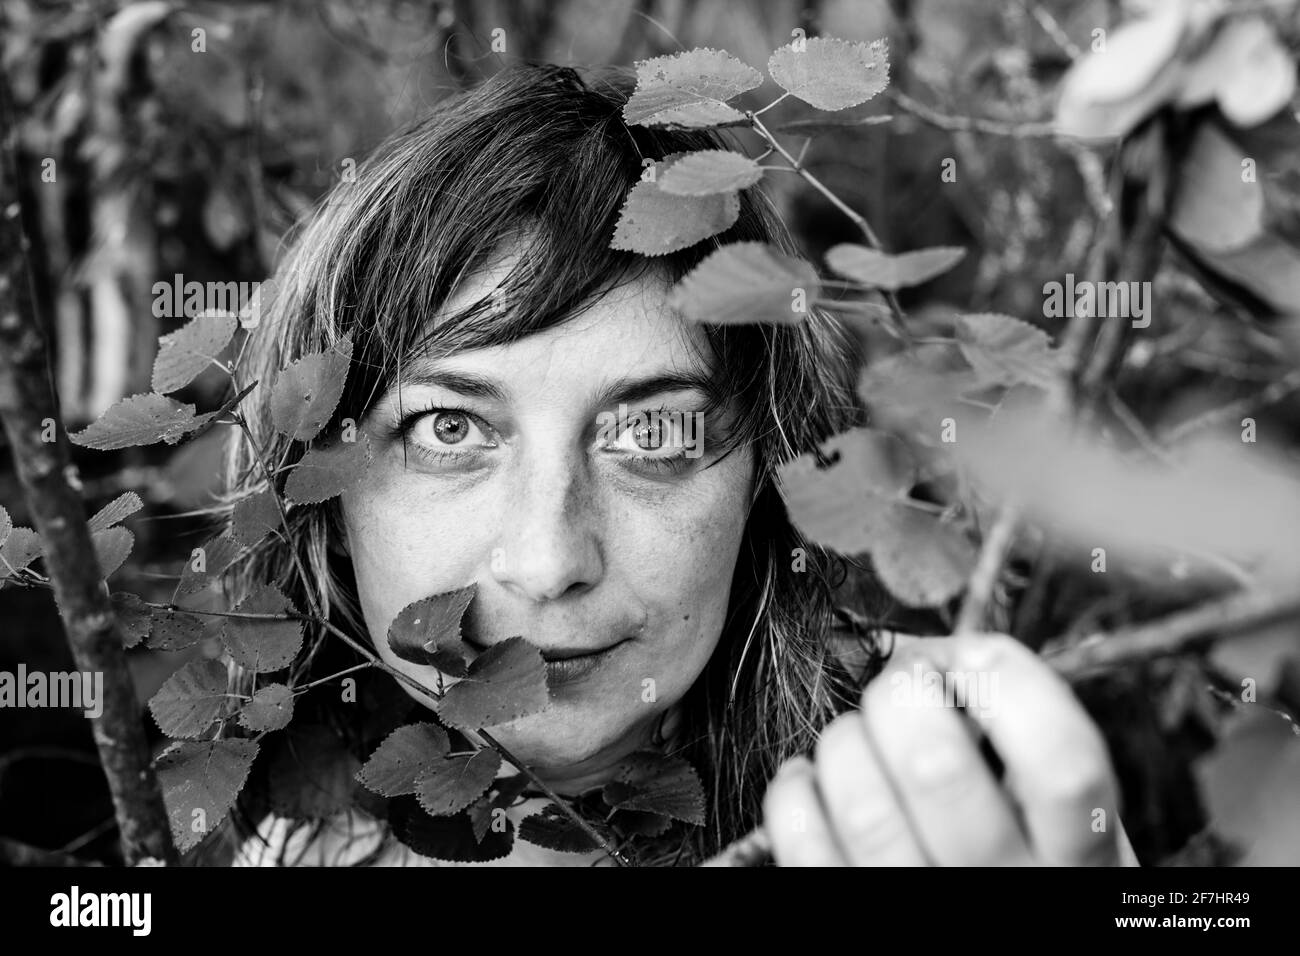 Portrait of a woman in close-up among the leaves in the park. Black and white photo. Stock Photo